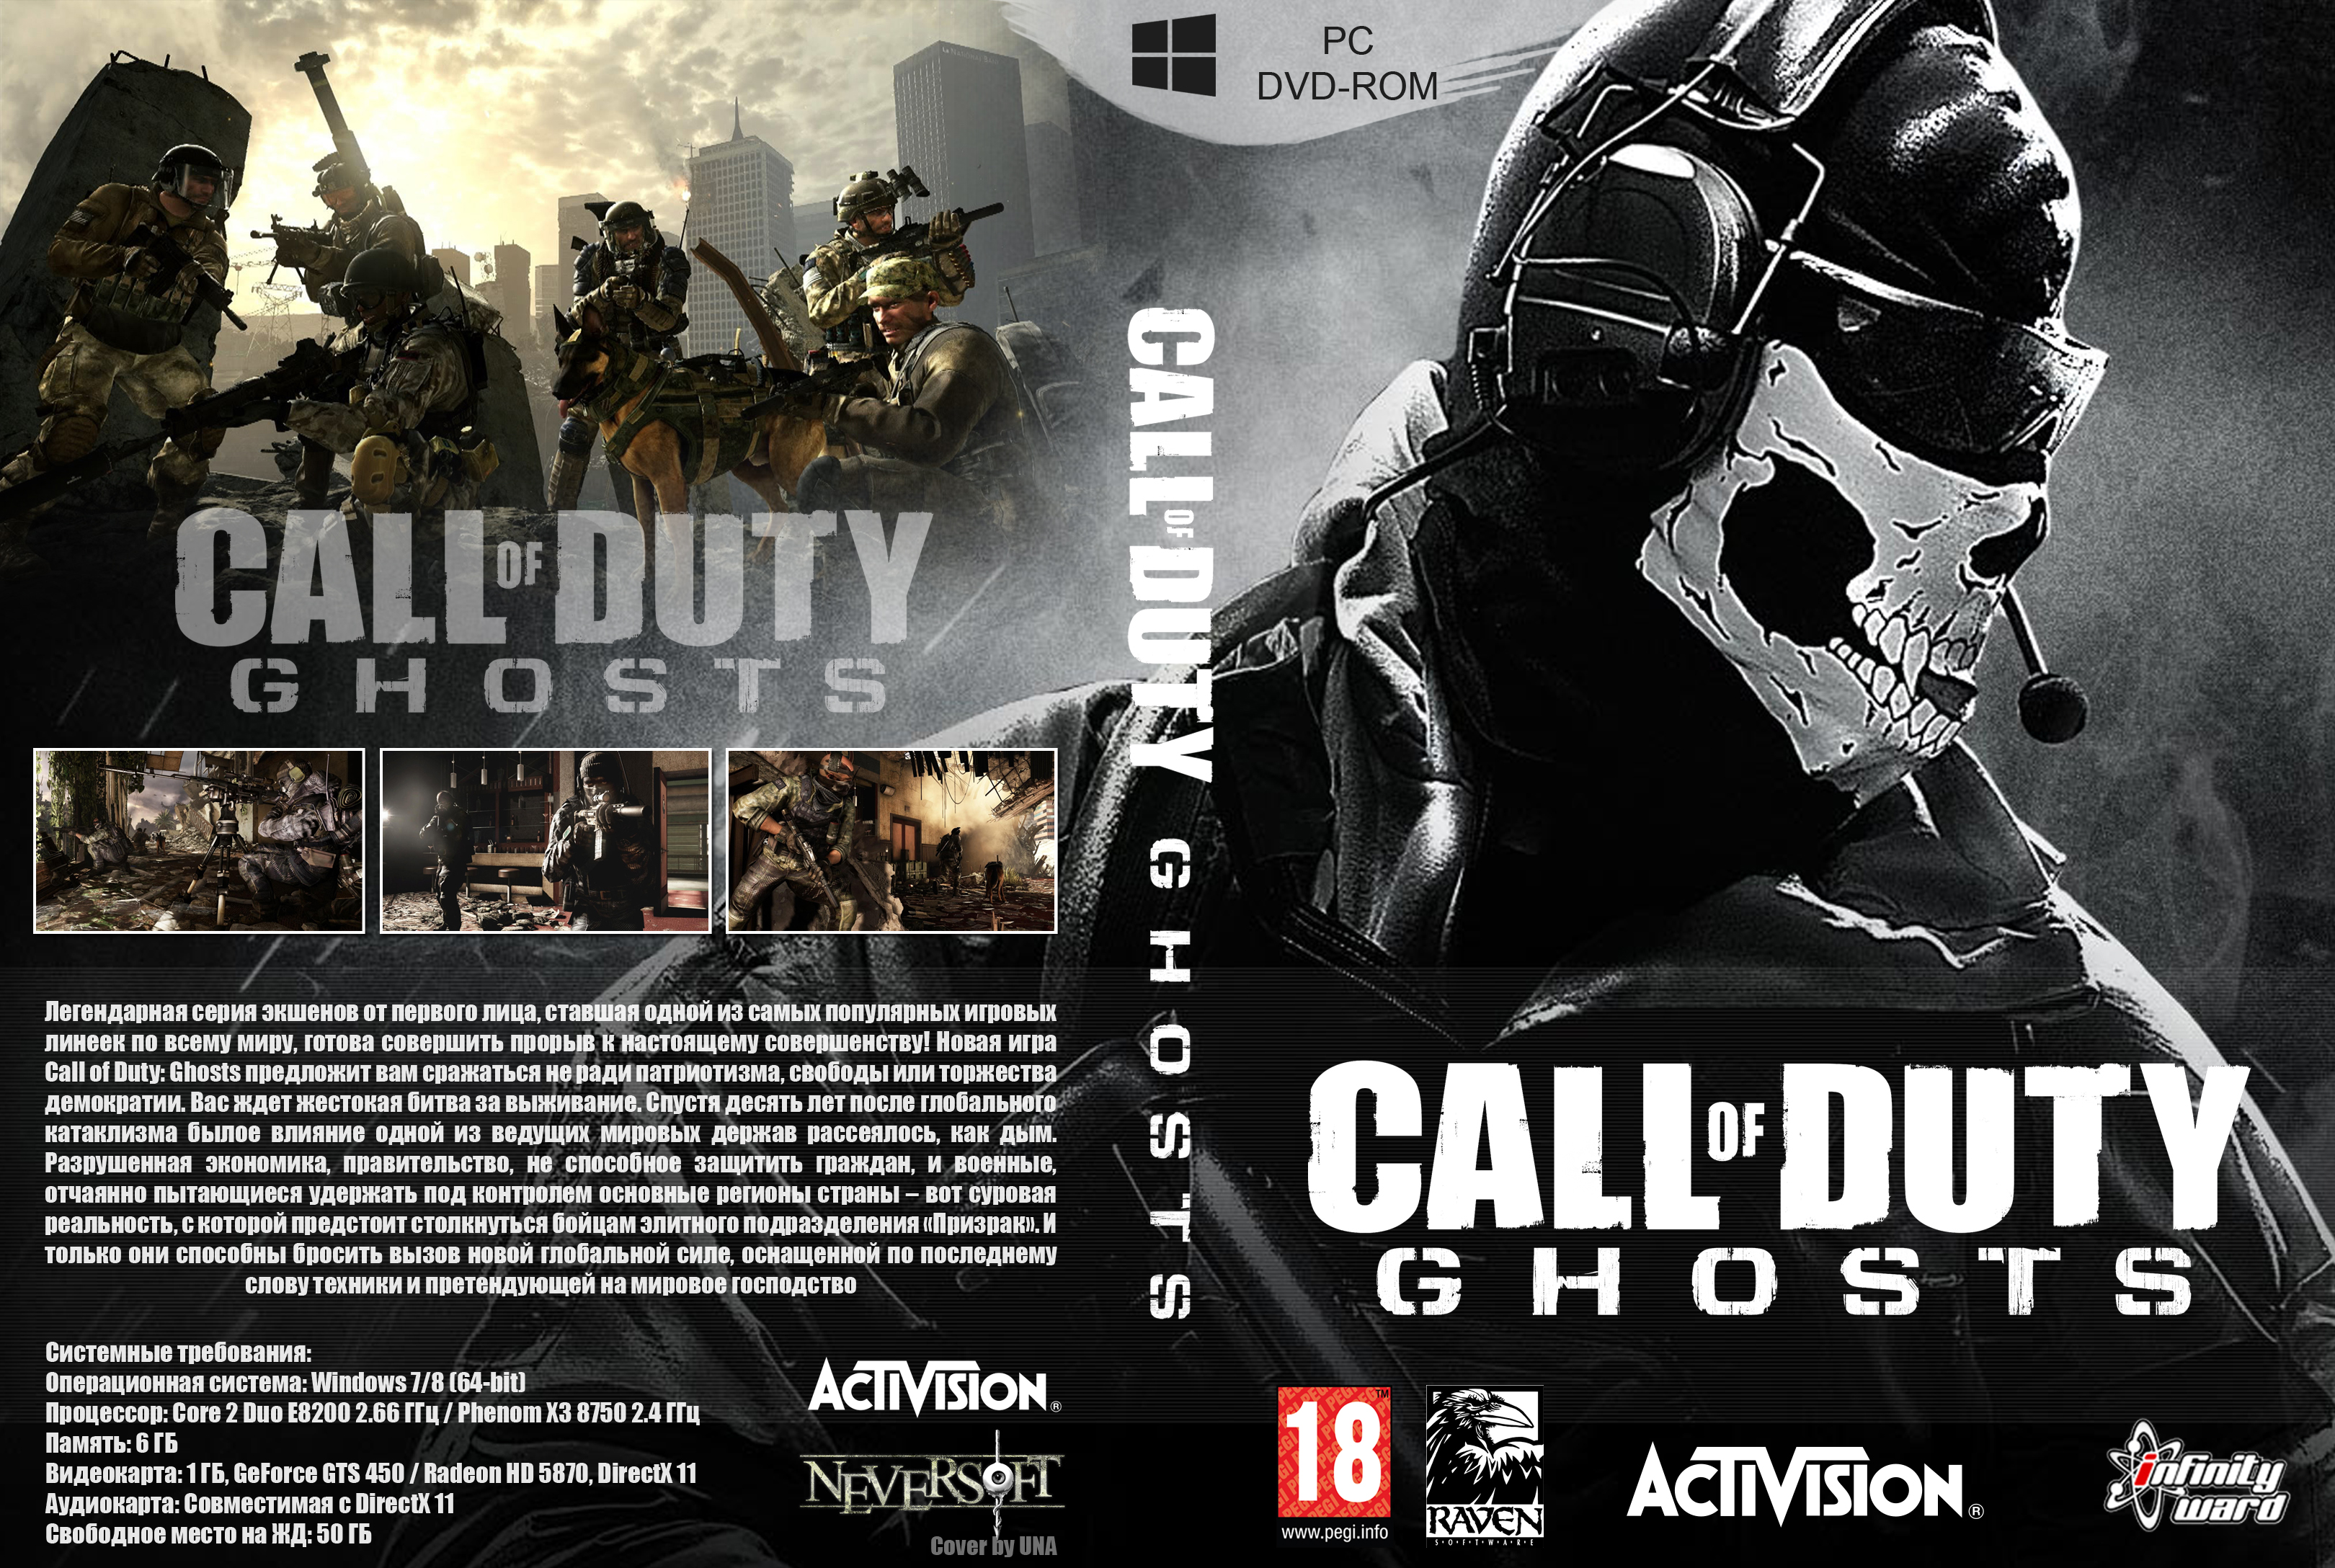 Viewing full size Call of Duty Ghosts box cover.